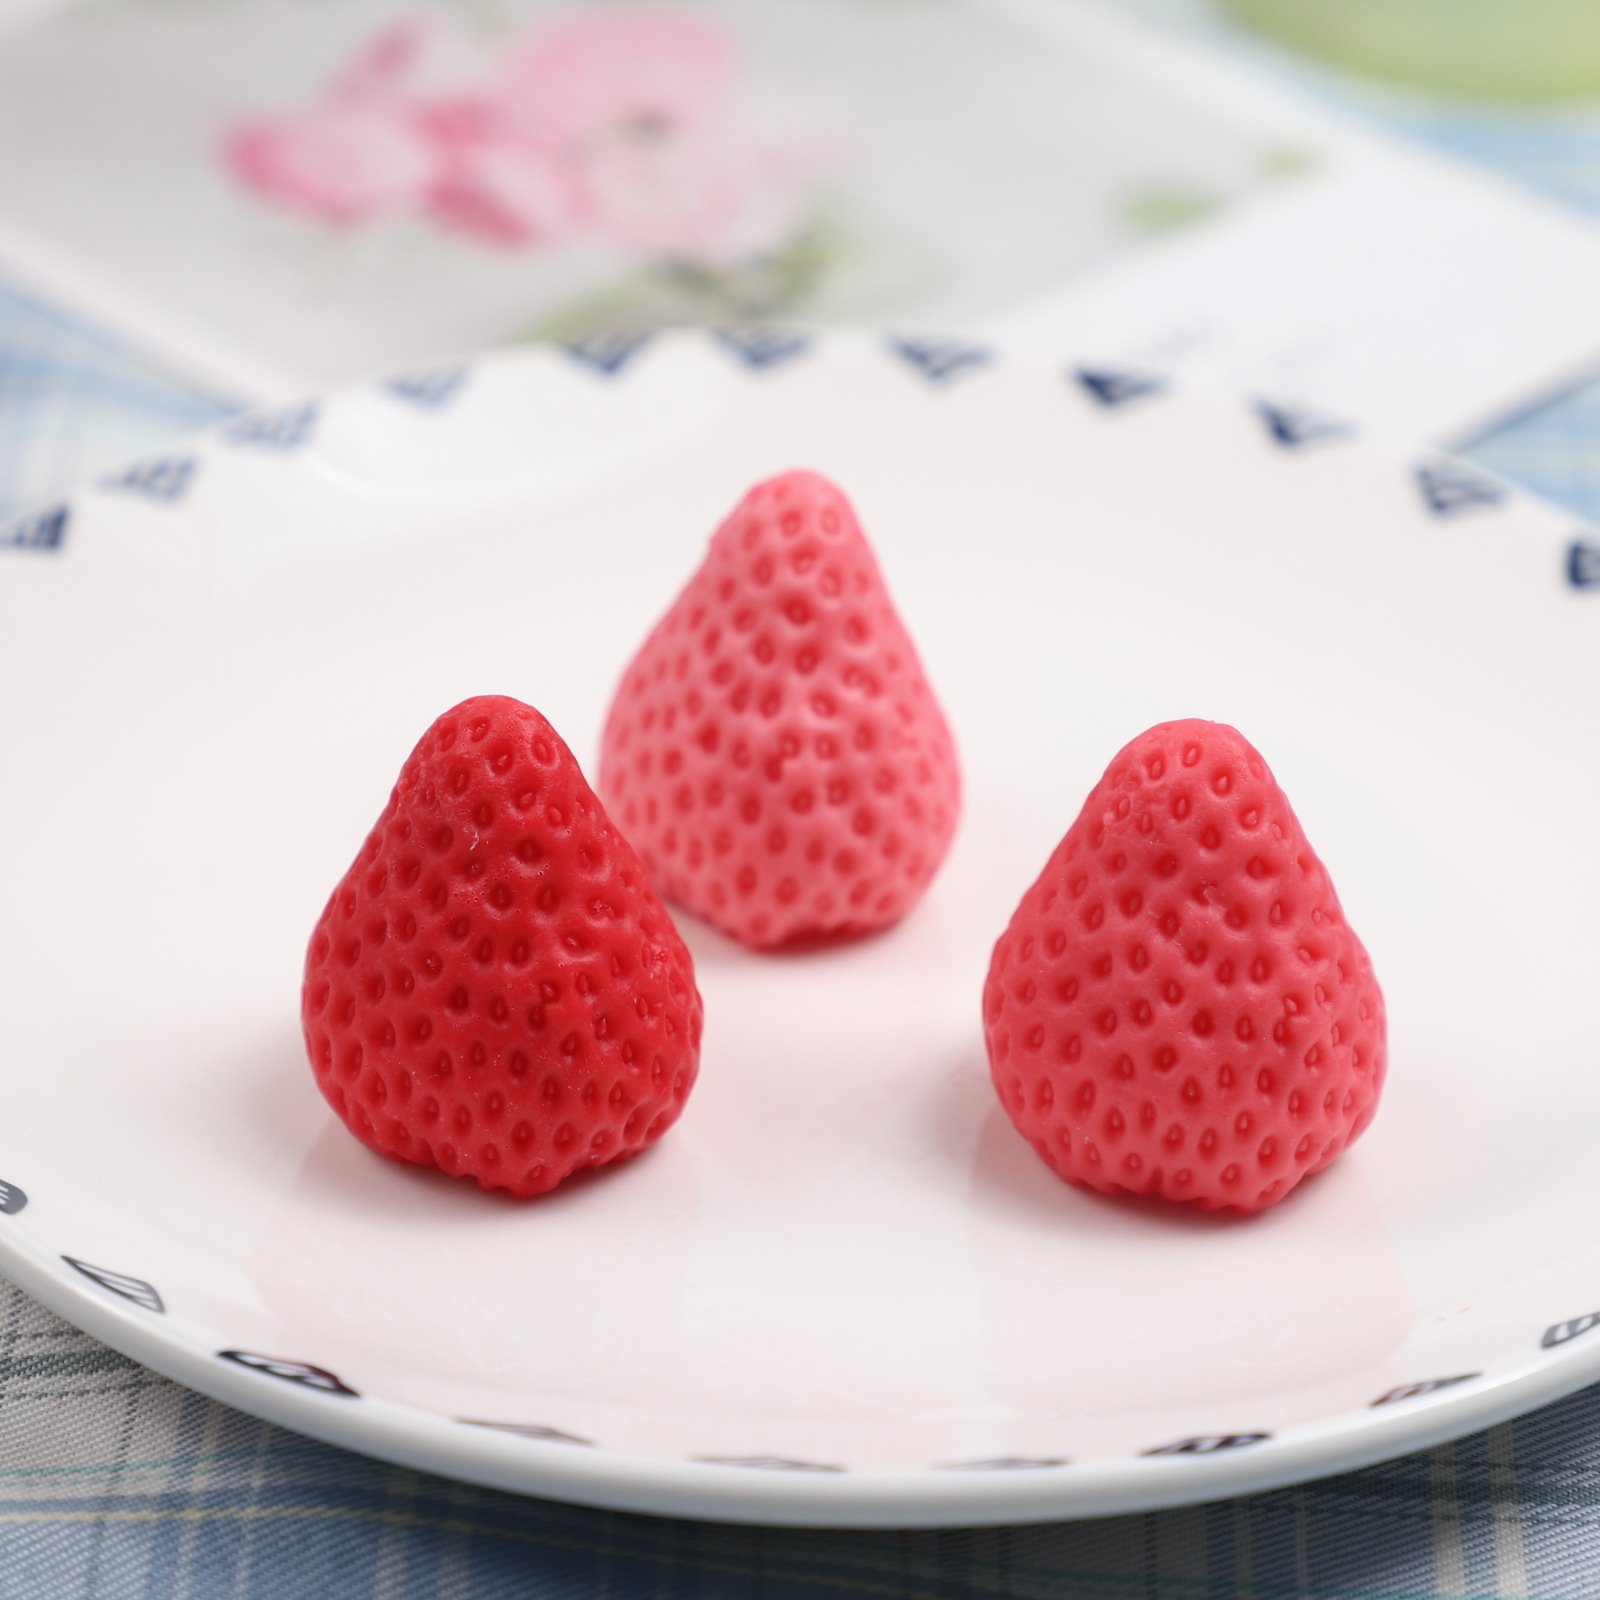 3D Big Strawberry Shaped Silicone Mold & 2 Dessert Spoons,for Baking  Creative Mousse Cake Topper Dessert Cup Decoration Chocolate Truffle Pastry  Fruit